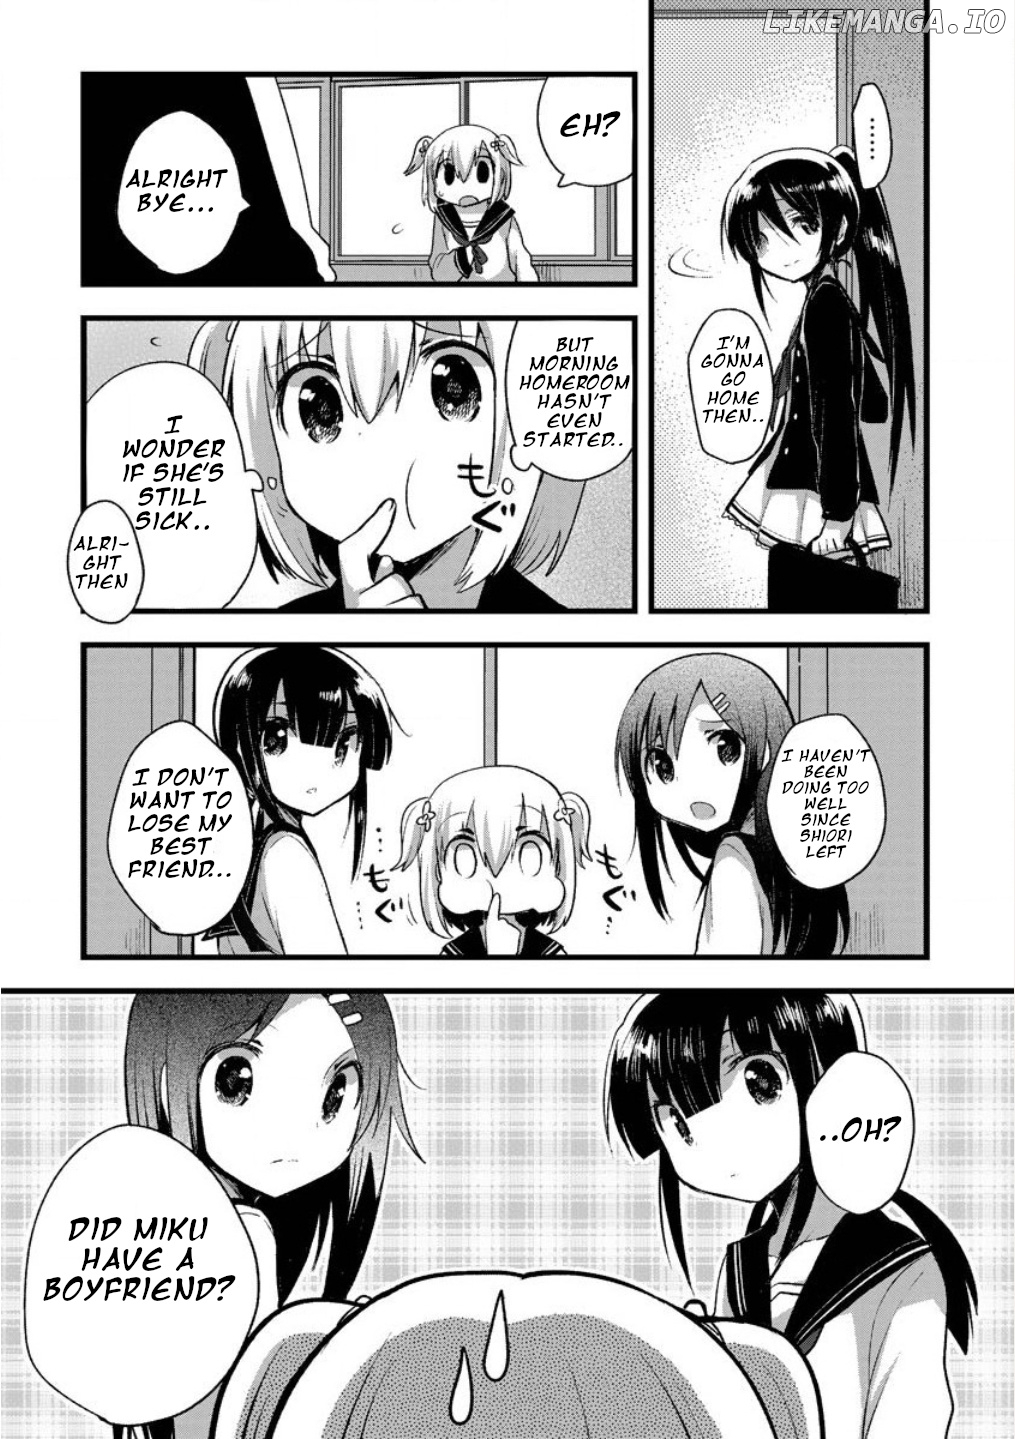 Corpse Party Cemetery 0 - Kaibyaku no Ars Moriendi chapter 5 - page 4